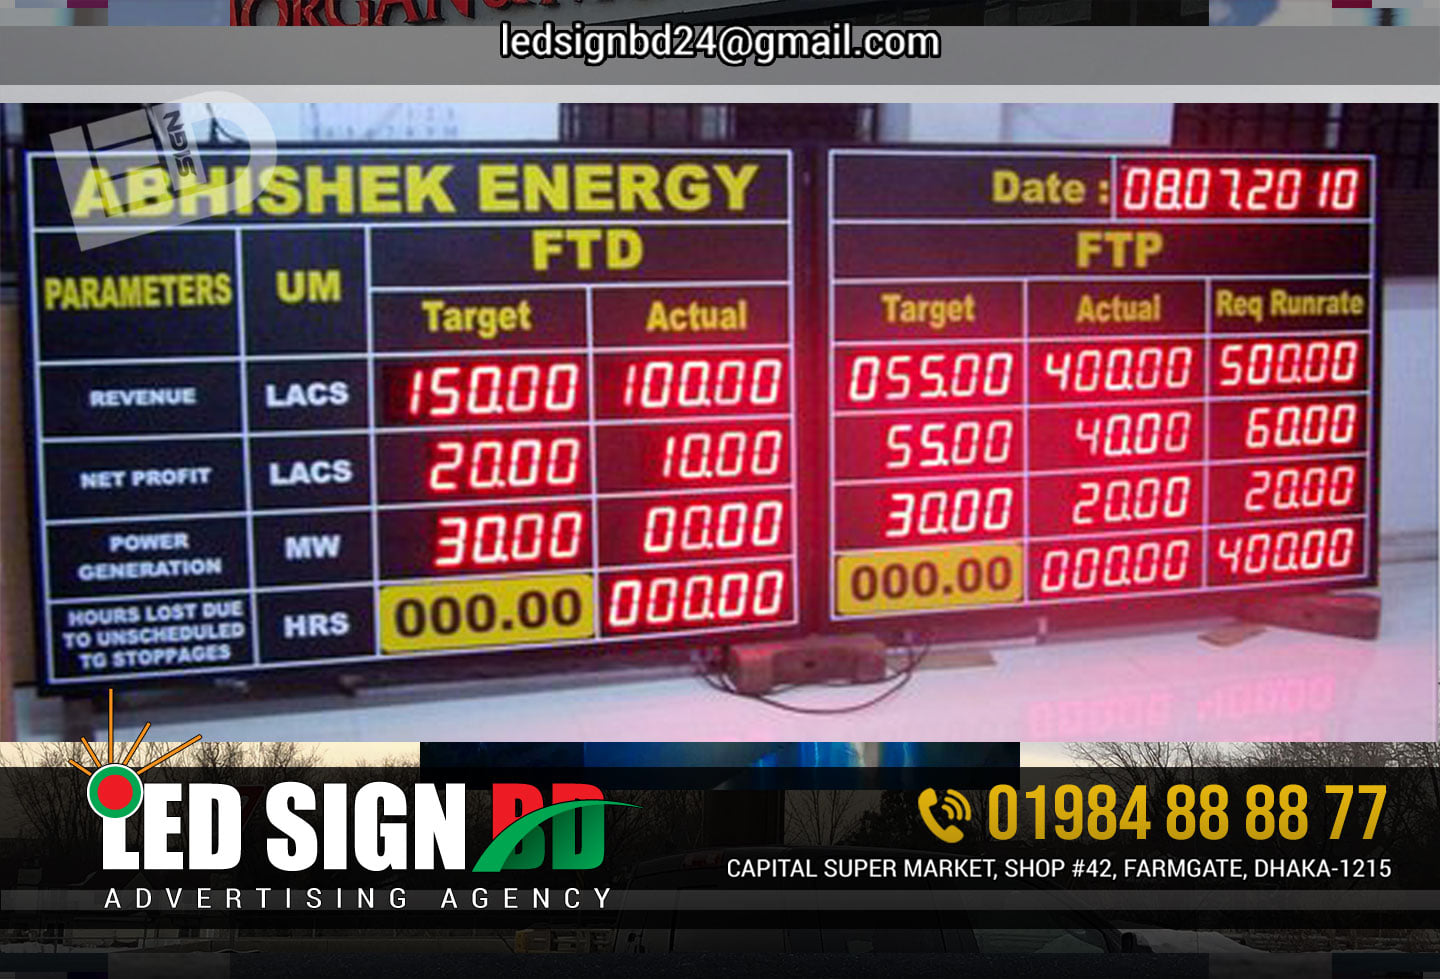 Led RGB Color Tile Counter, Super Market Led Signboard Signage, Name Plate Design in Dhaka Bangladesh, Red Wall Mounted Outdoor Scrolling LED Display Board,